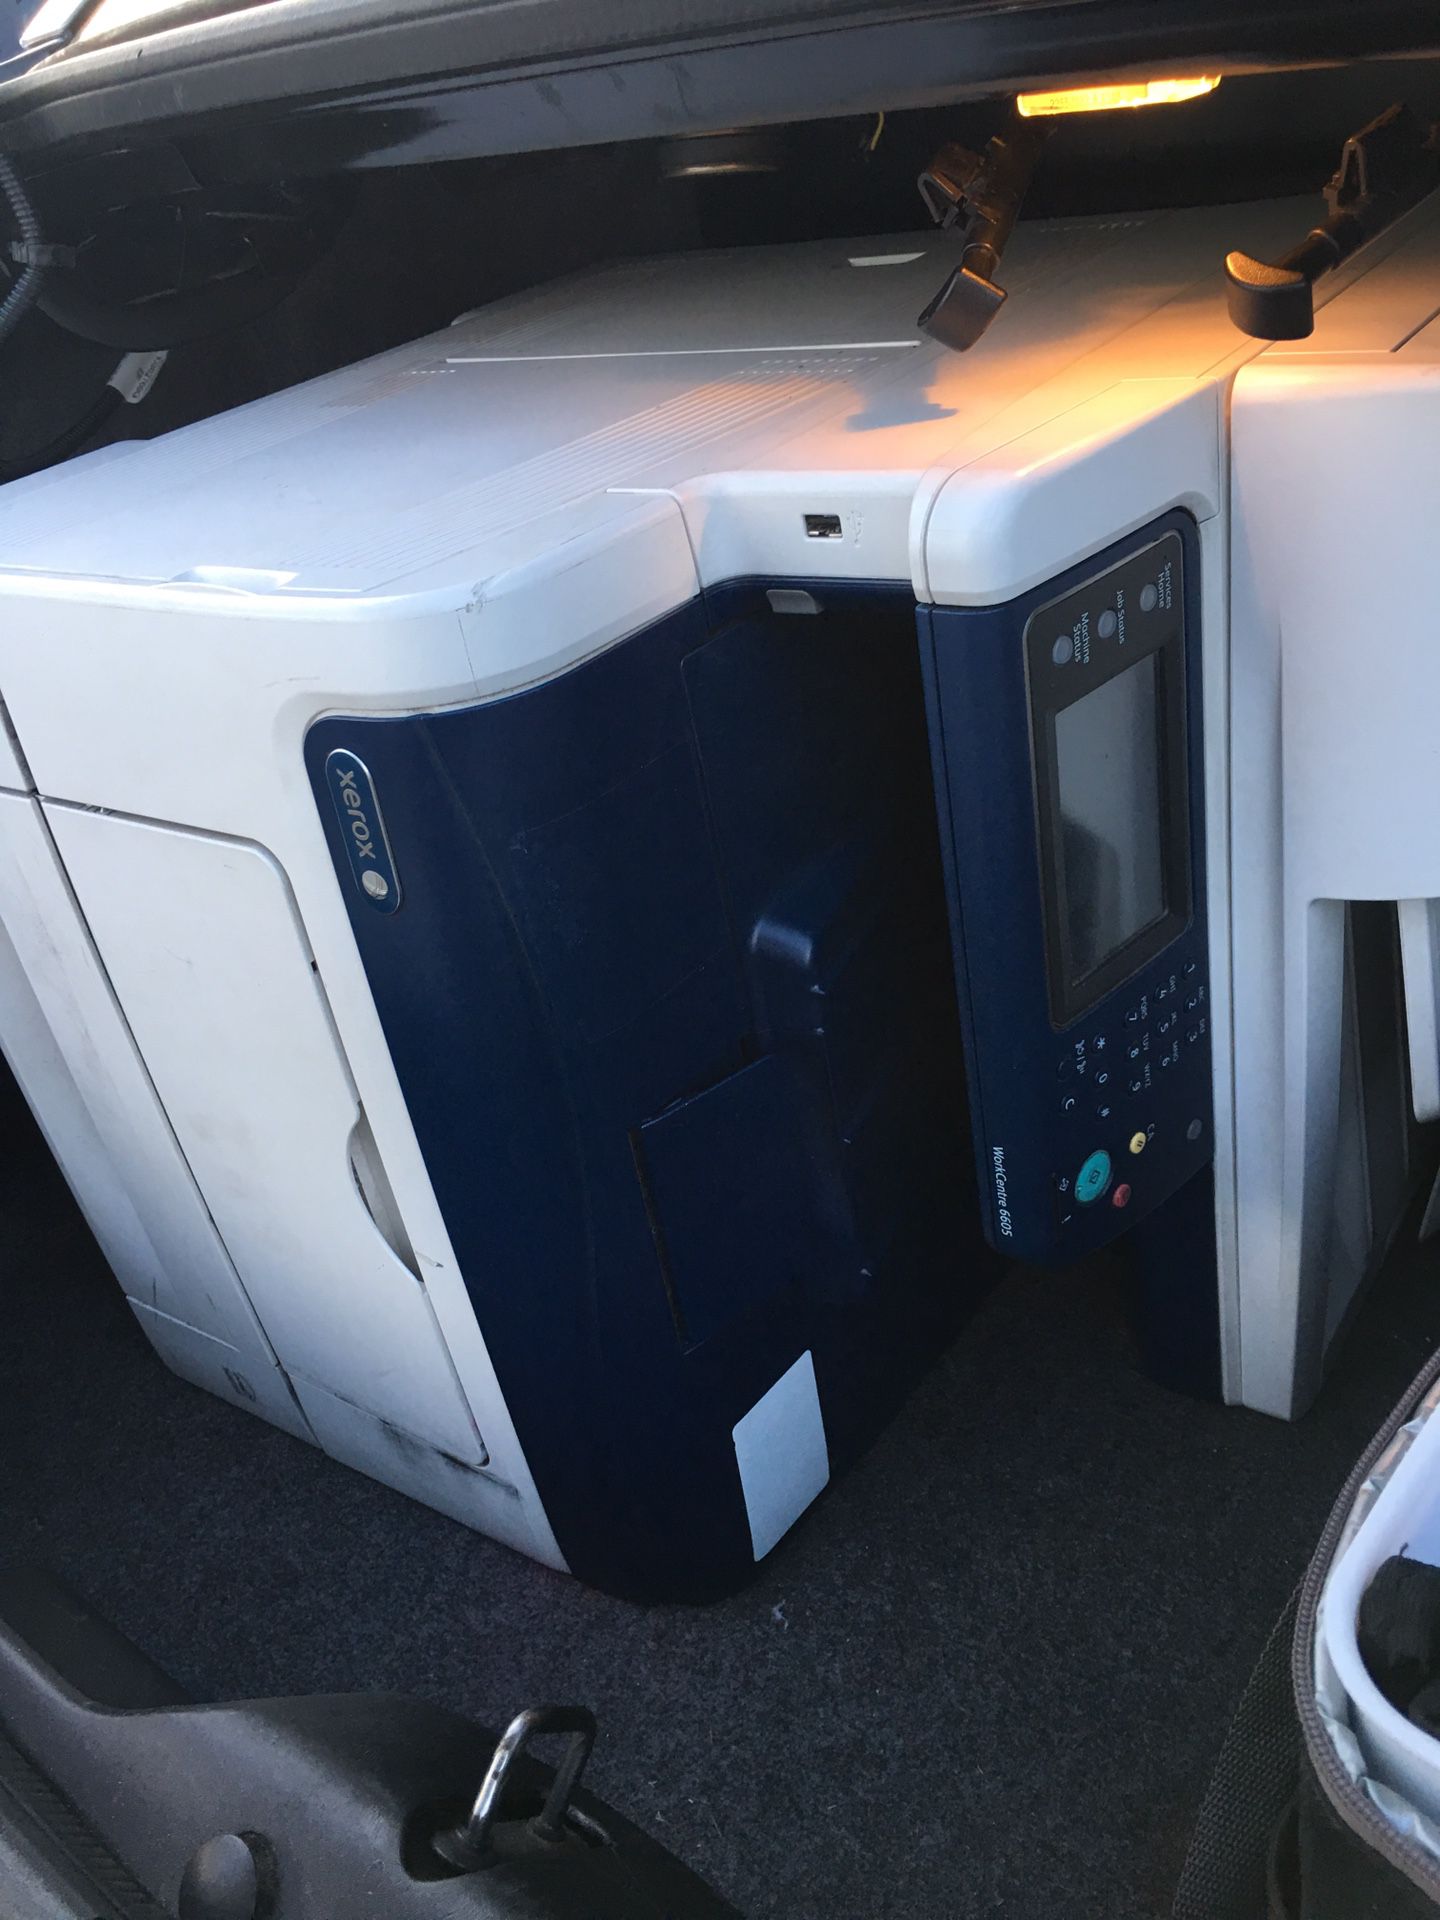 Xerox WorkCentre 6605 color laser all in one FREE delivery in the bay area SF